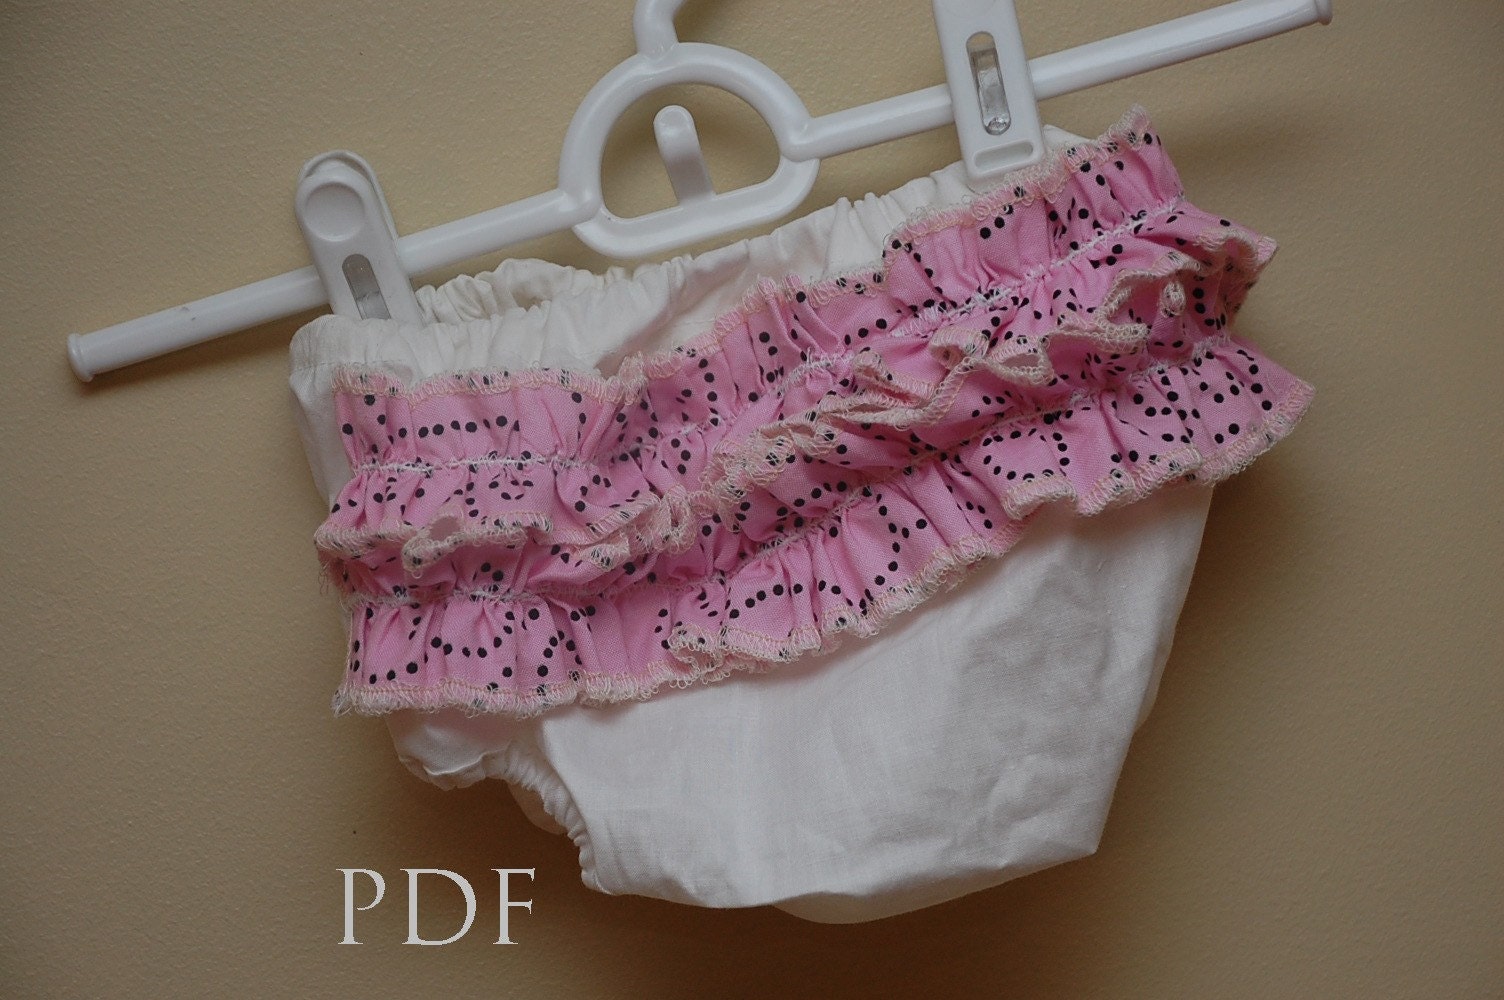 Free Sewing Patterns - Free Patterns for Sewing Projects